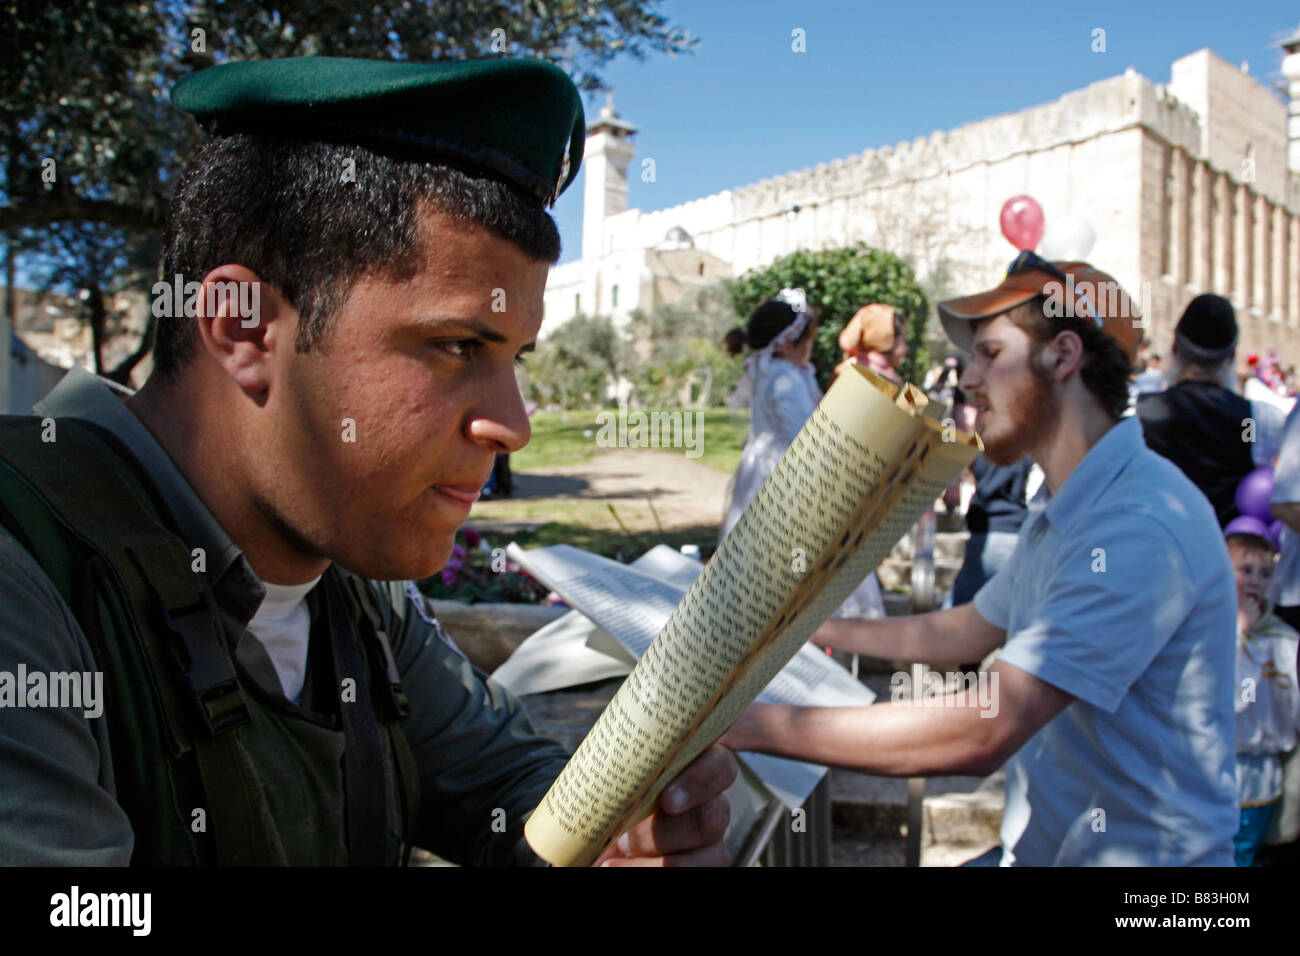 Israeli policeman reading a religious text during Purim celebrations in Hebron. Stock Photo